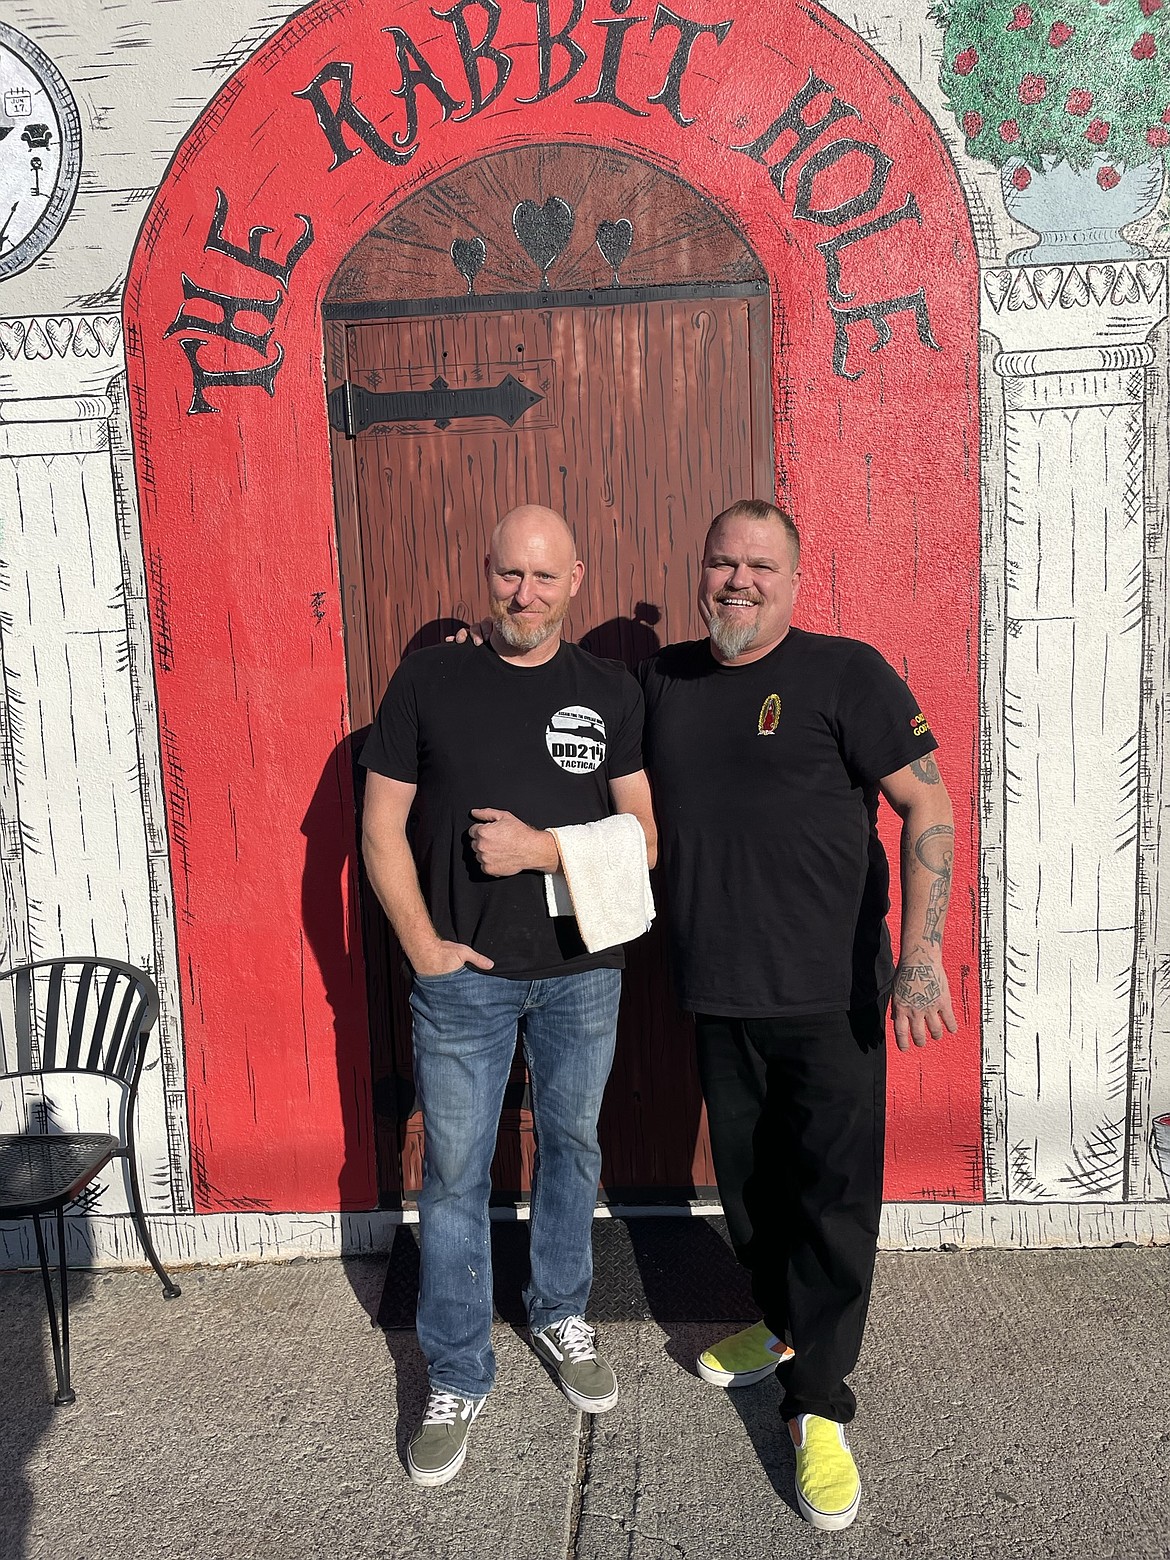 Rick Biery, owner of Rick’s Eatery and Entertainment, and Paul Carney, owner of EDUBS C/S, take a break from serving Thanksgiving meals and pose at the side entrance to Rick’s.